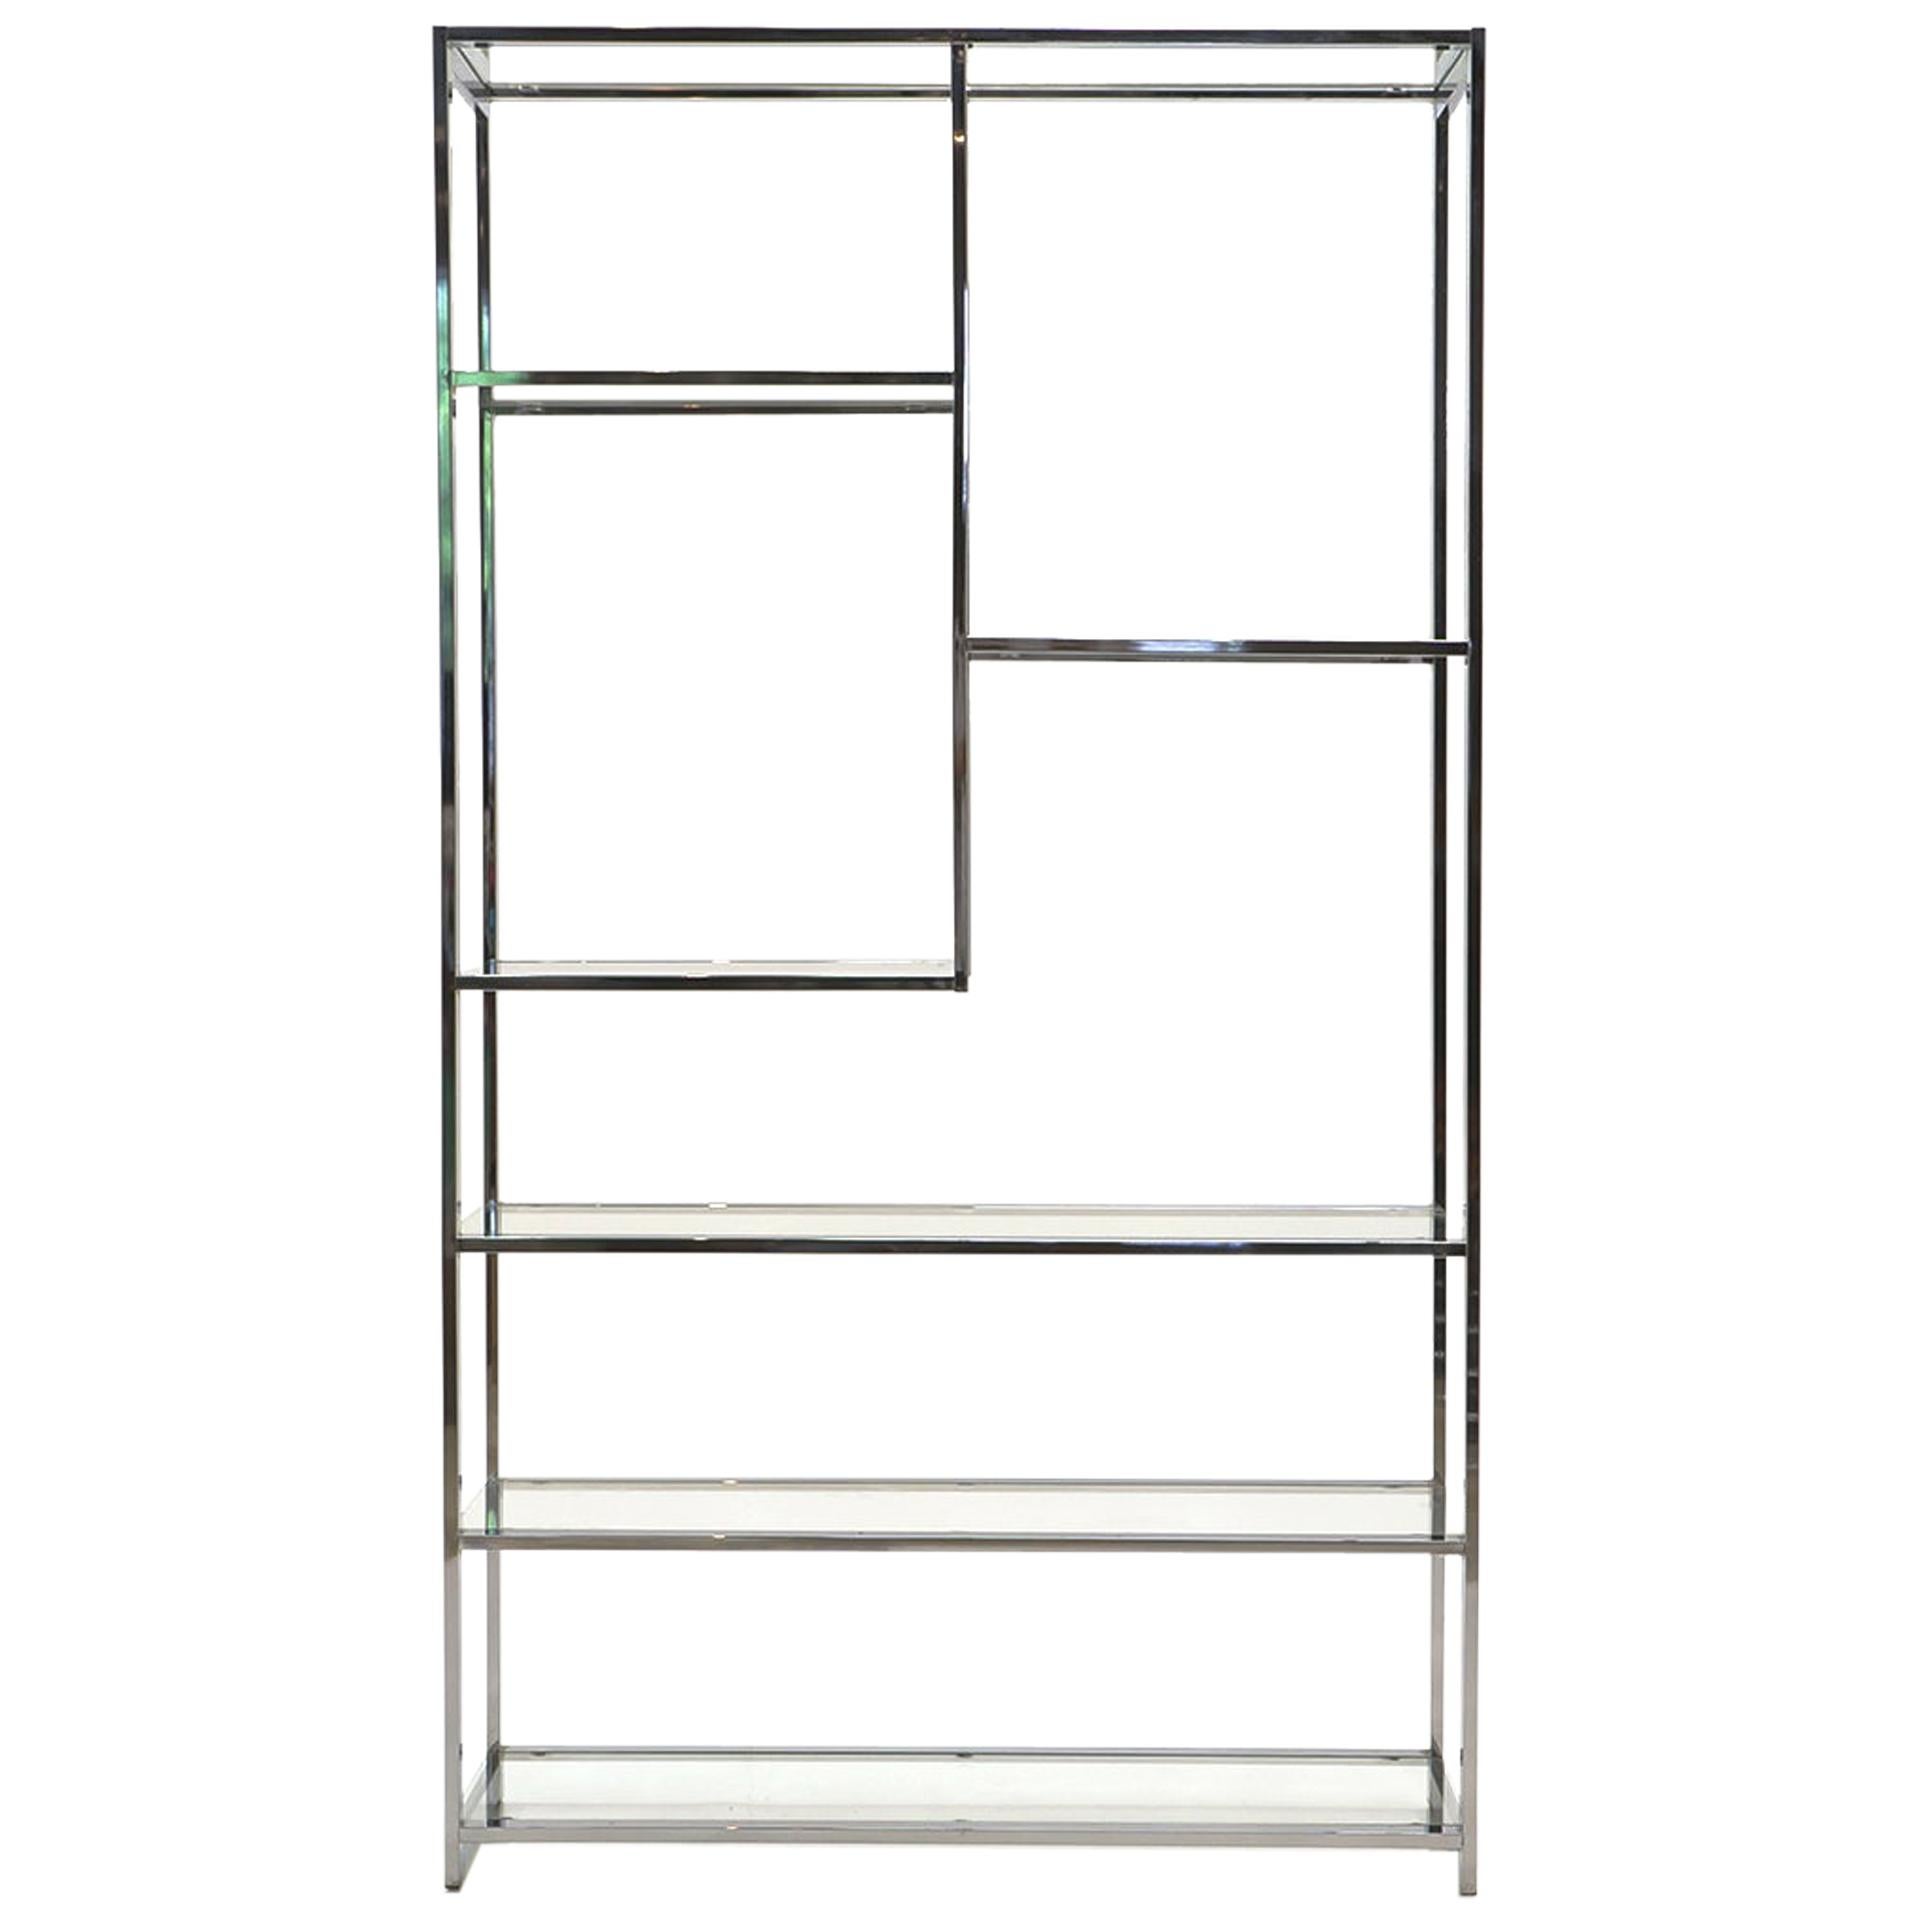 Chrome and Glass Étagère or Shelving or Display